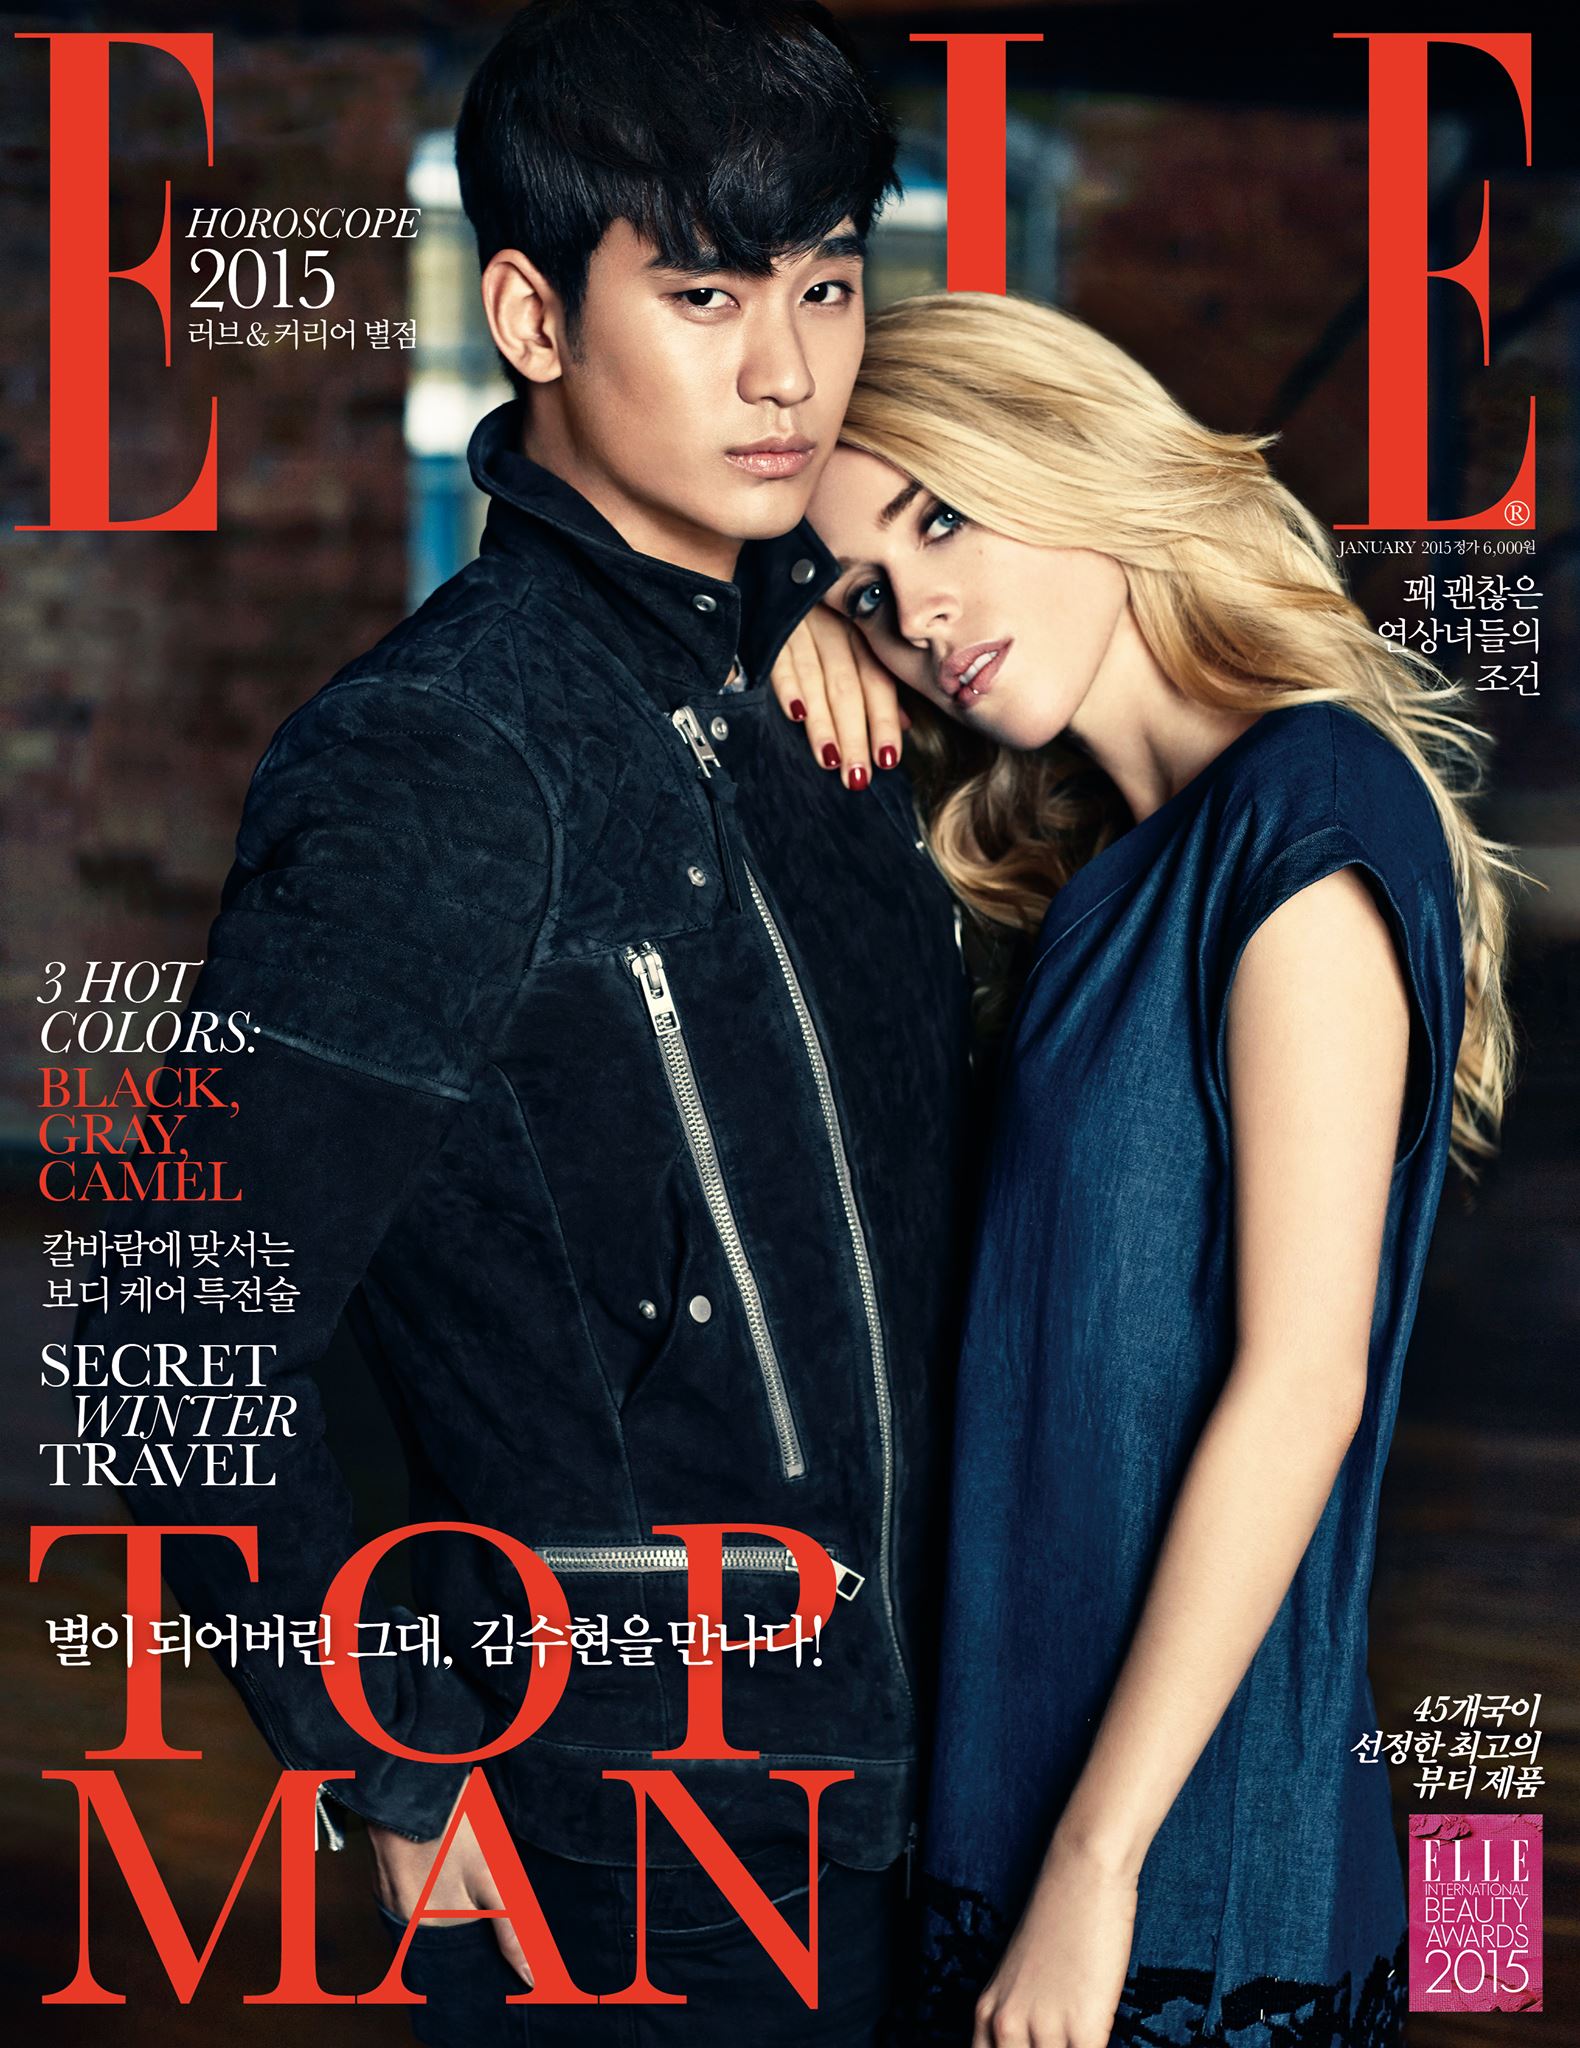 Kim Soo Hyun shows his manly charm on the cover of “Elle”